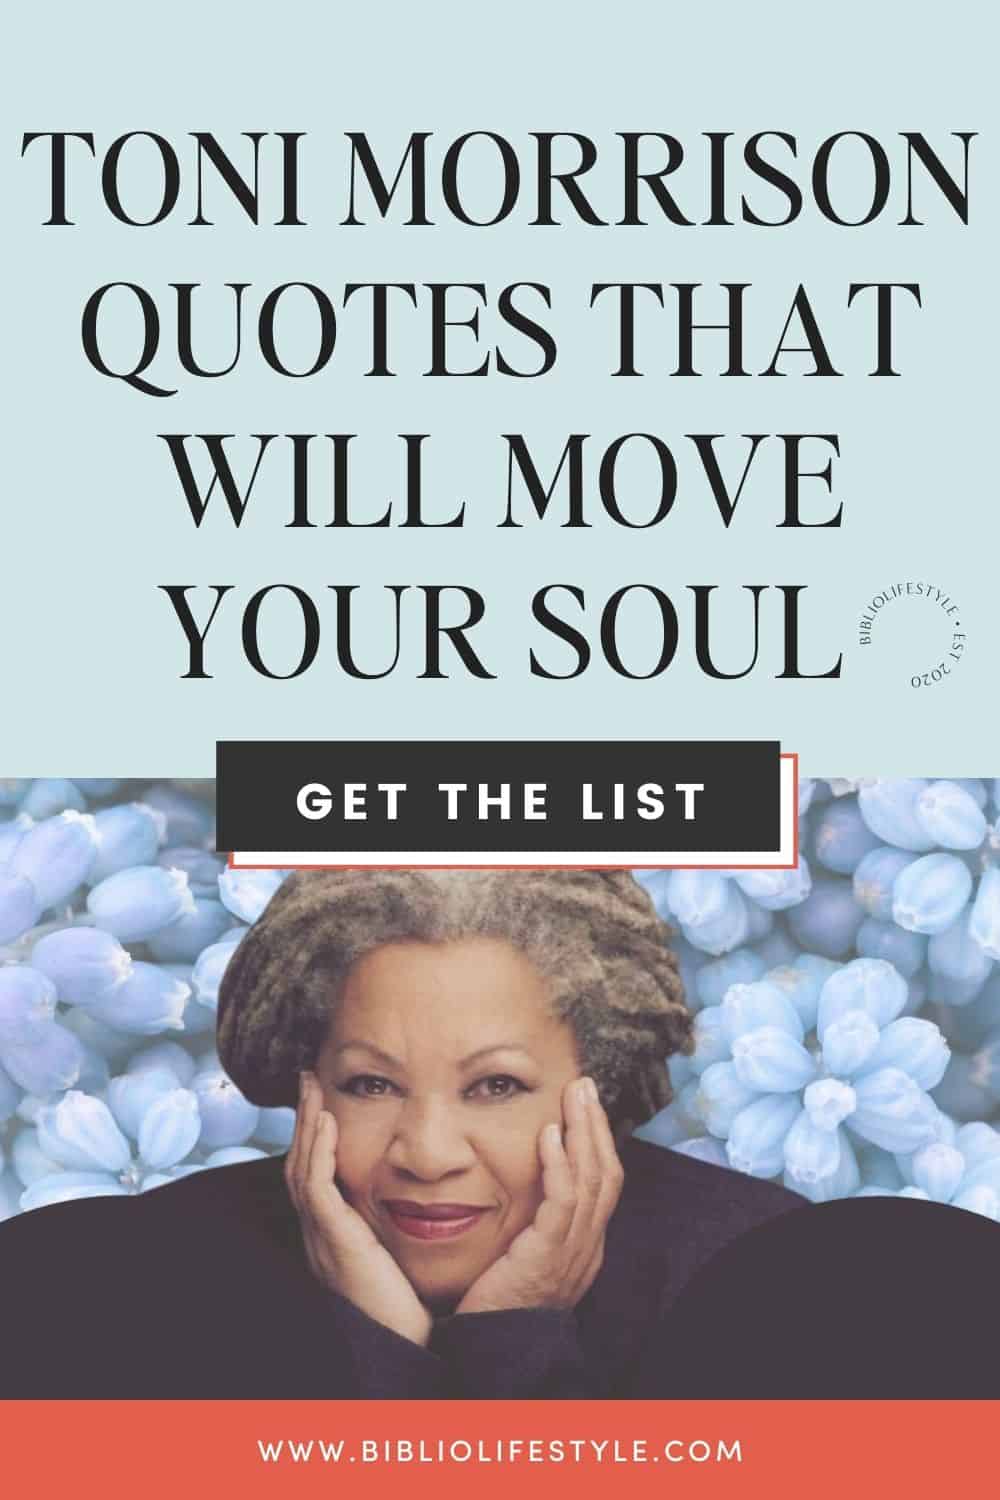 Toni Morrison Quotes That Will Move Your Soul